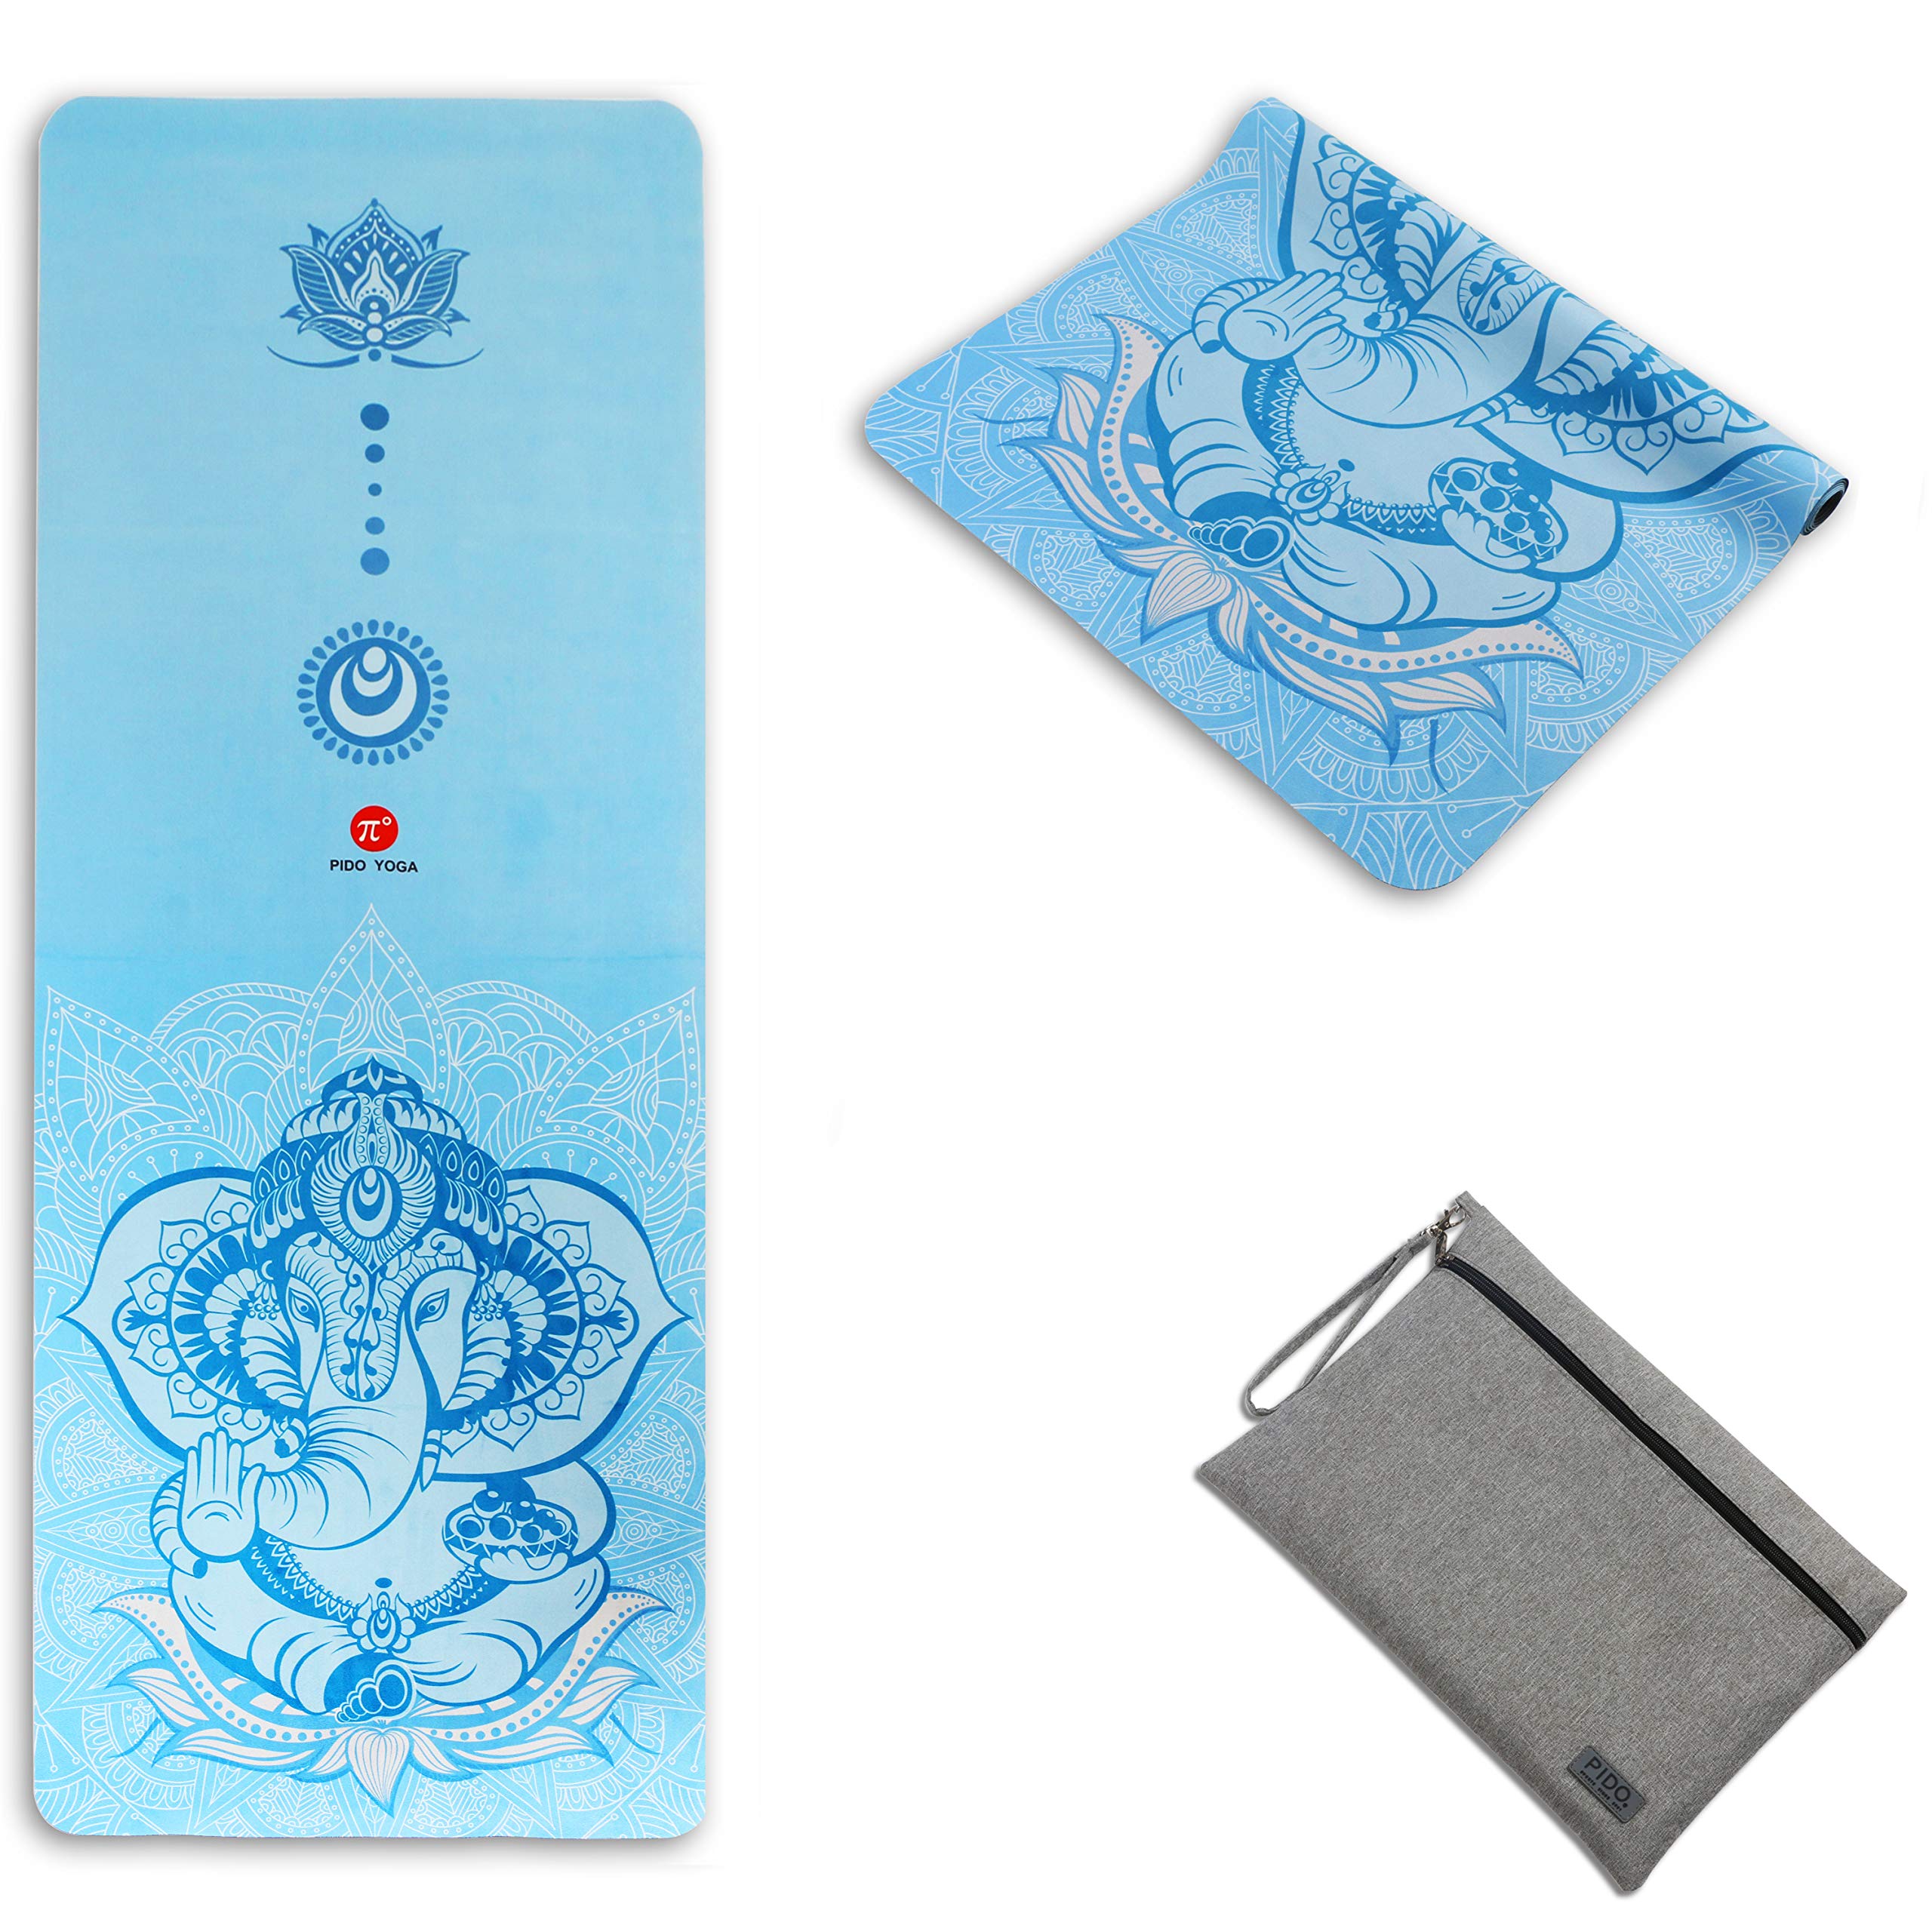 WWWW PIDO Travel Yoga Mat Suede Natural Rubber